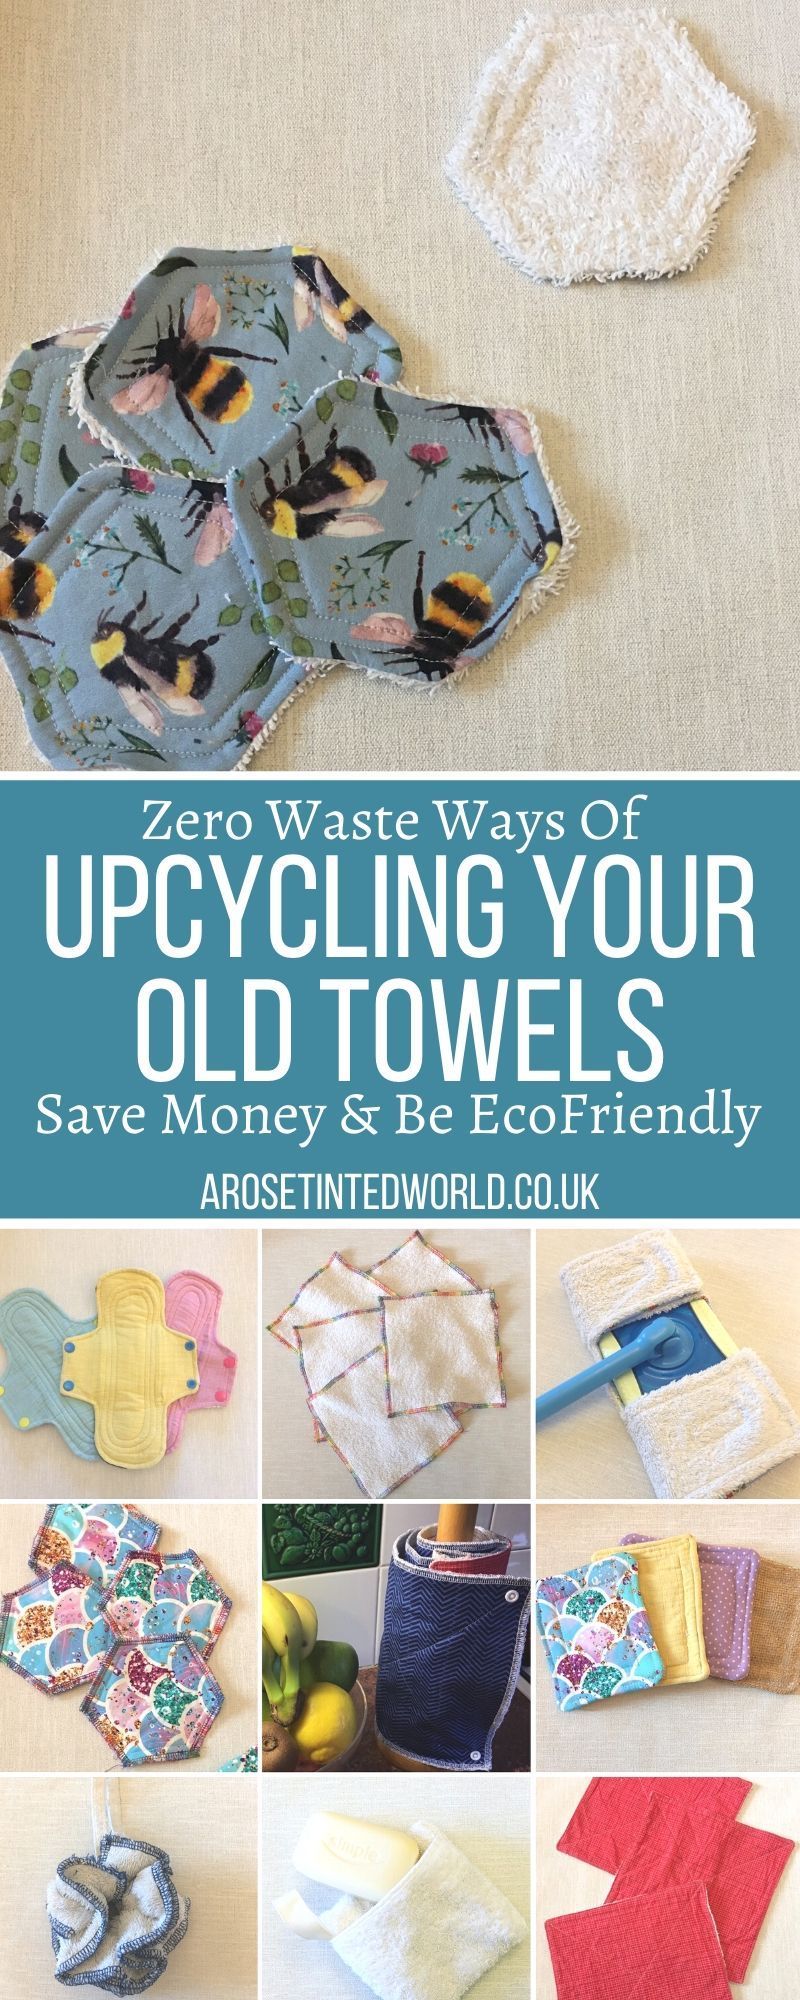 Ways Of Upcycling Your Old Towels - Ways Of Upcycling Your Old Towels -   19 diy recycle ideas